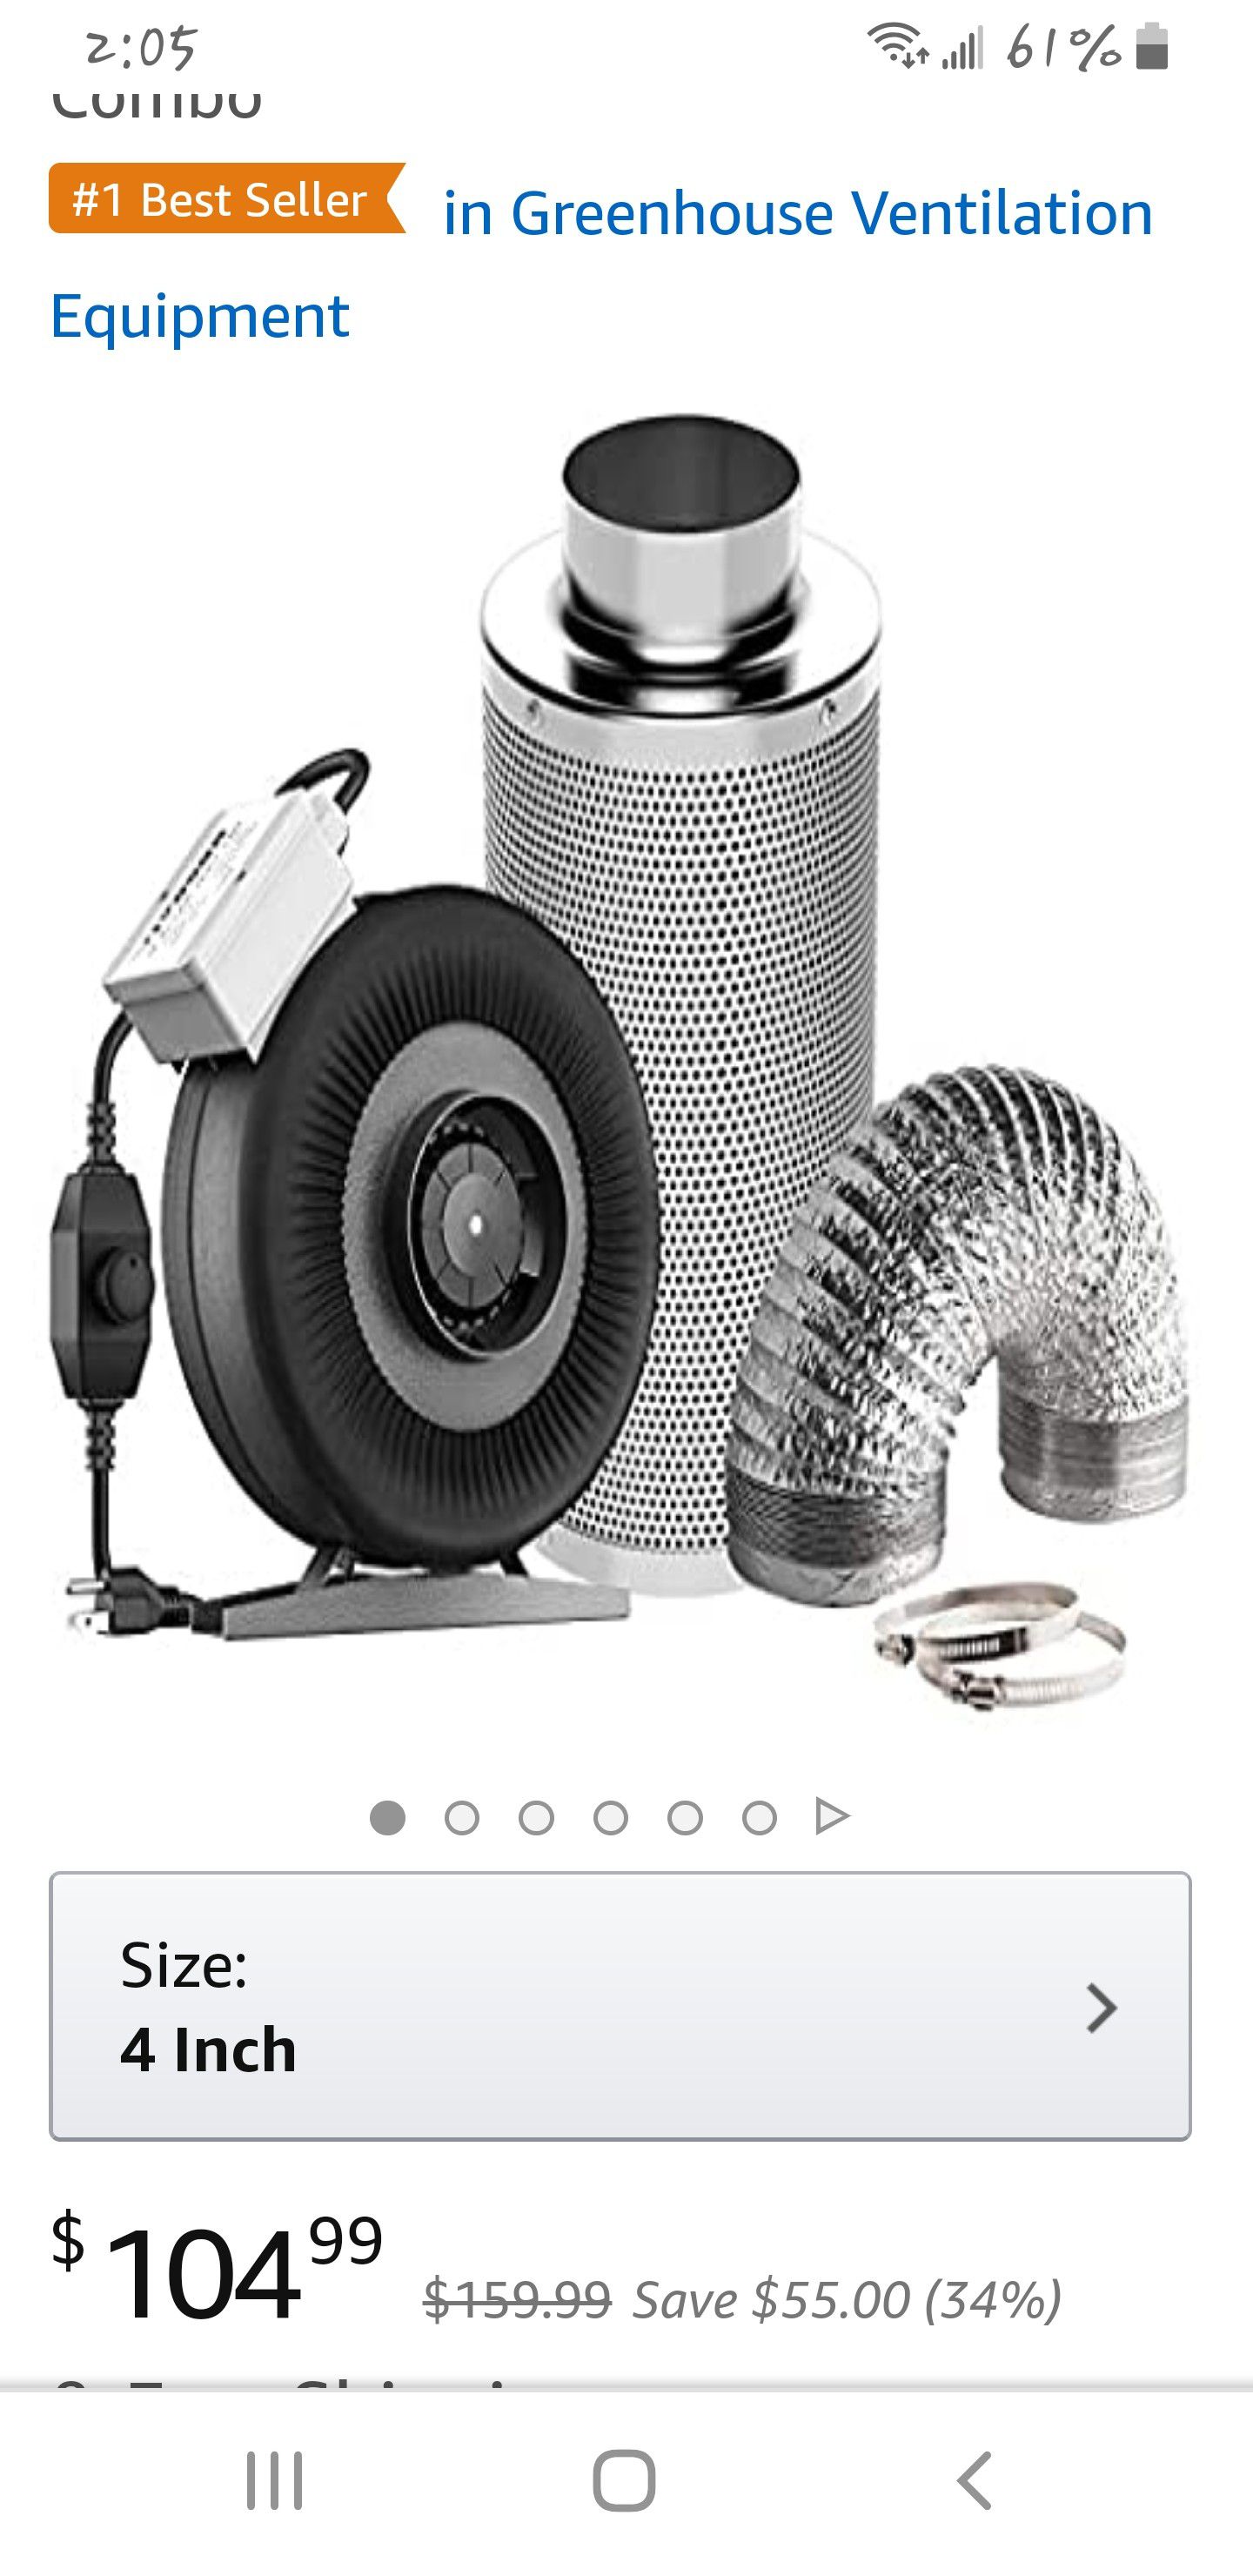 Fan, Carbon Filter and 8 Feet of Ducting Combo for Tent Ventilation